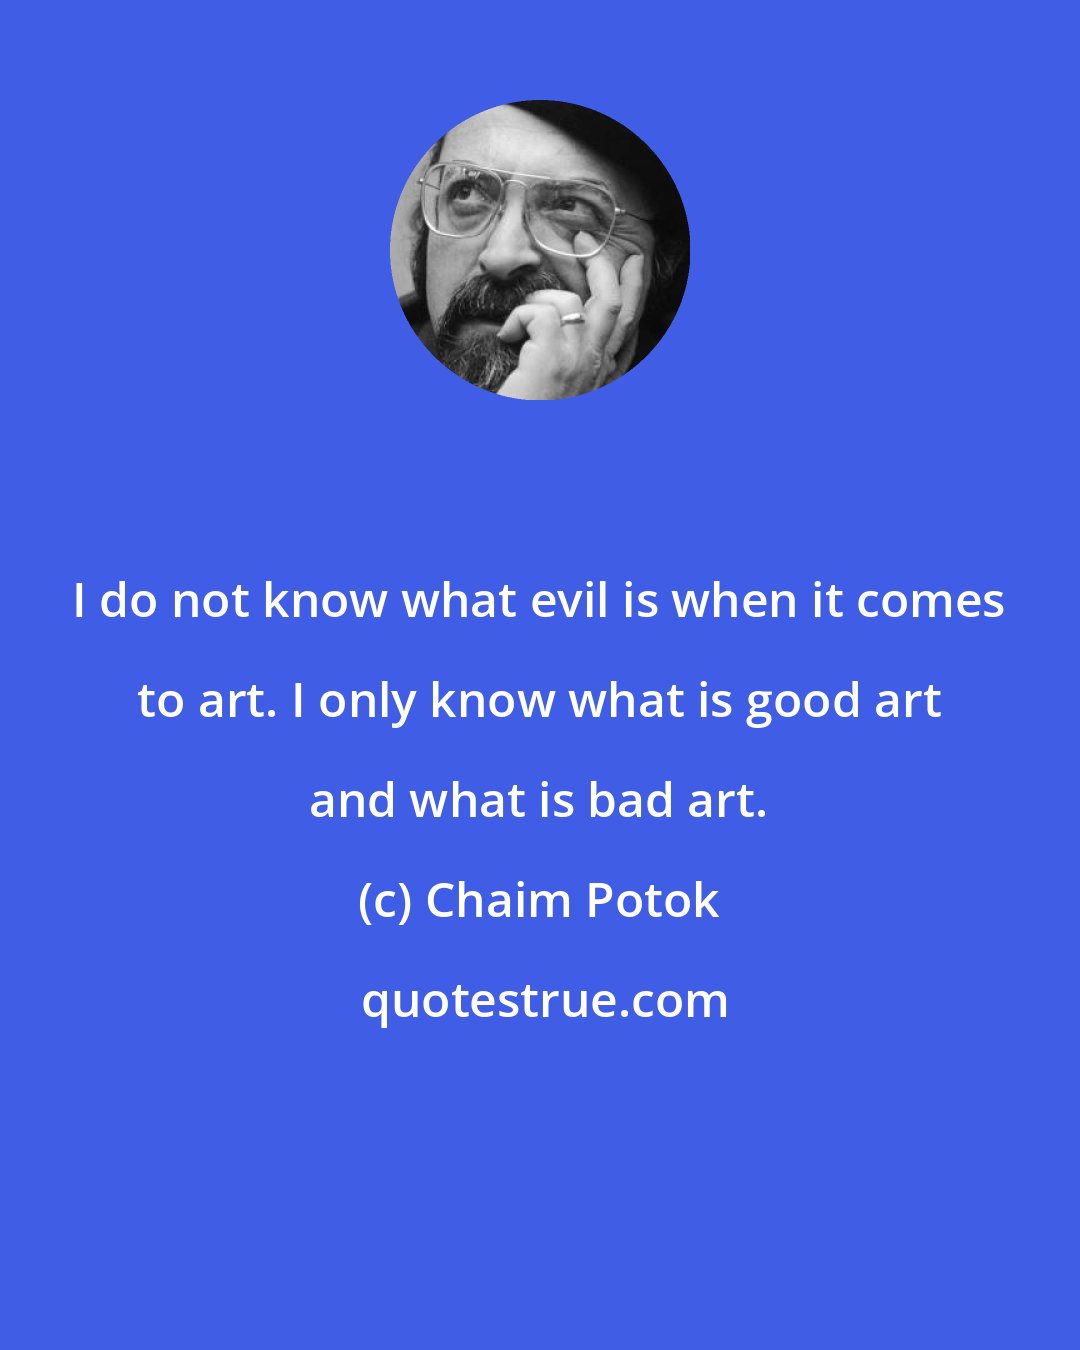 Chaim Potok: I do not know what evil is when it comes to art. I only know what is good art and what is bad art.